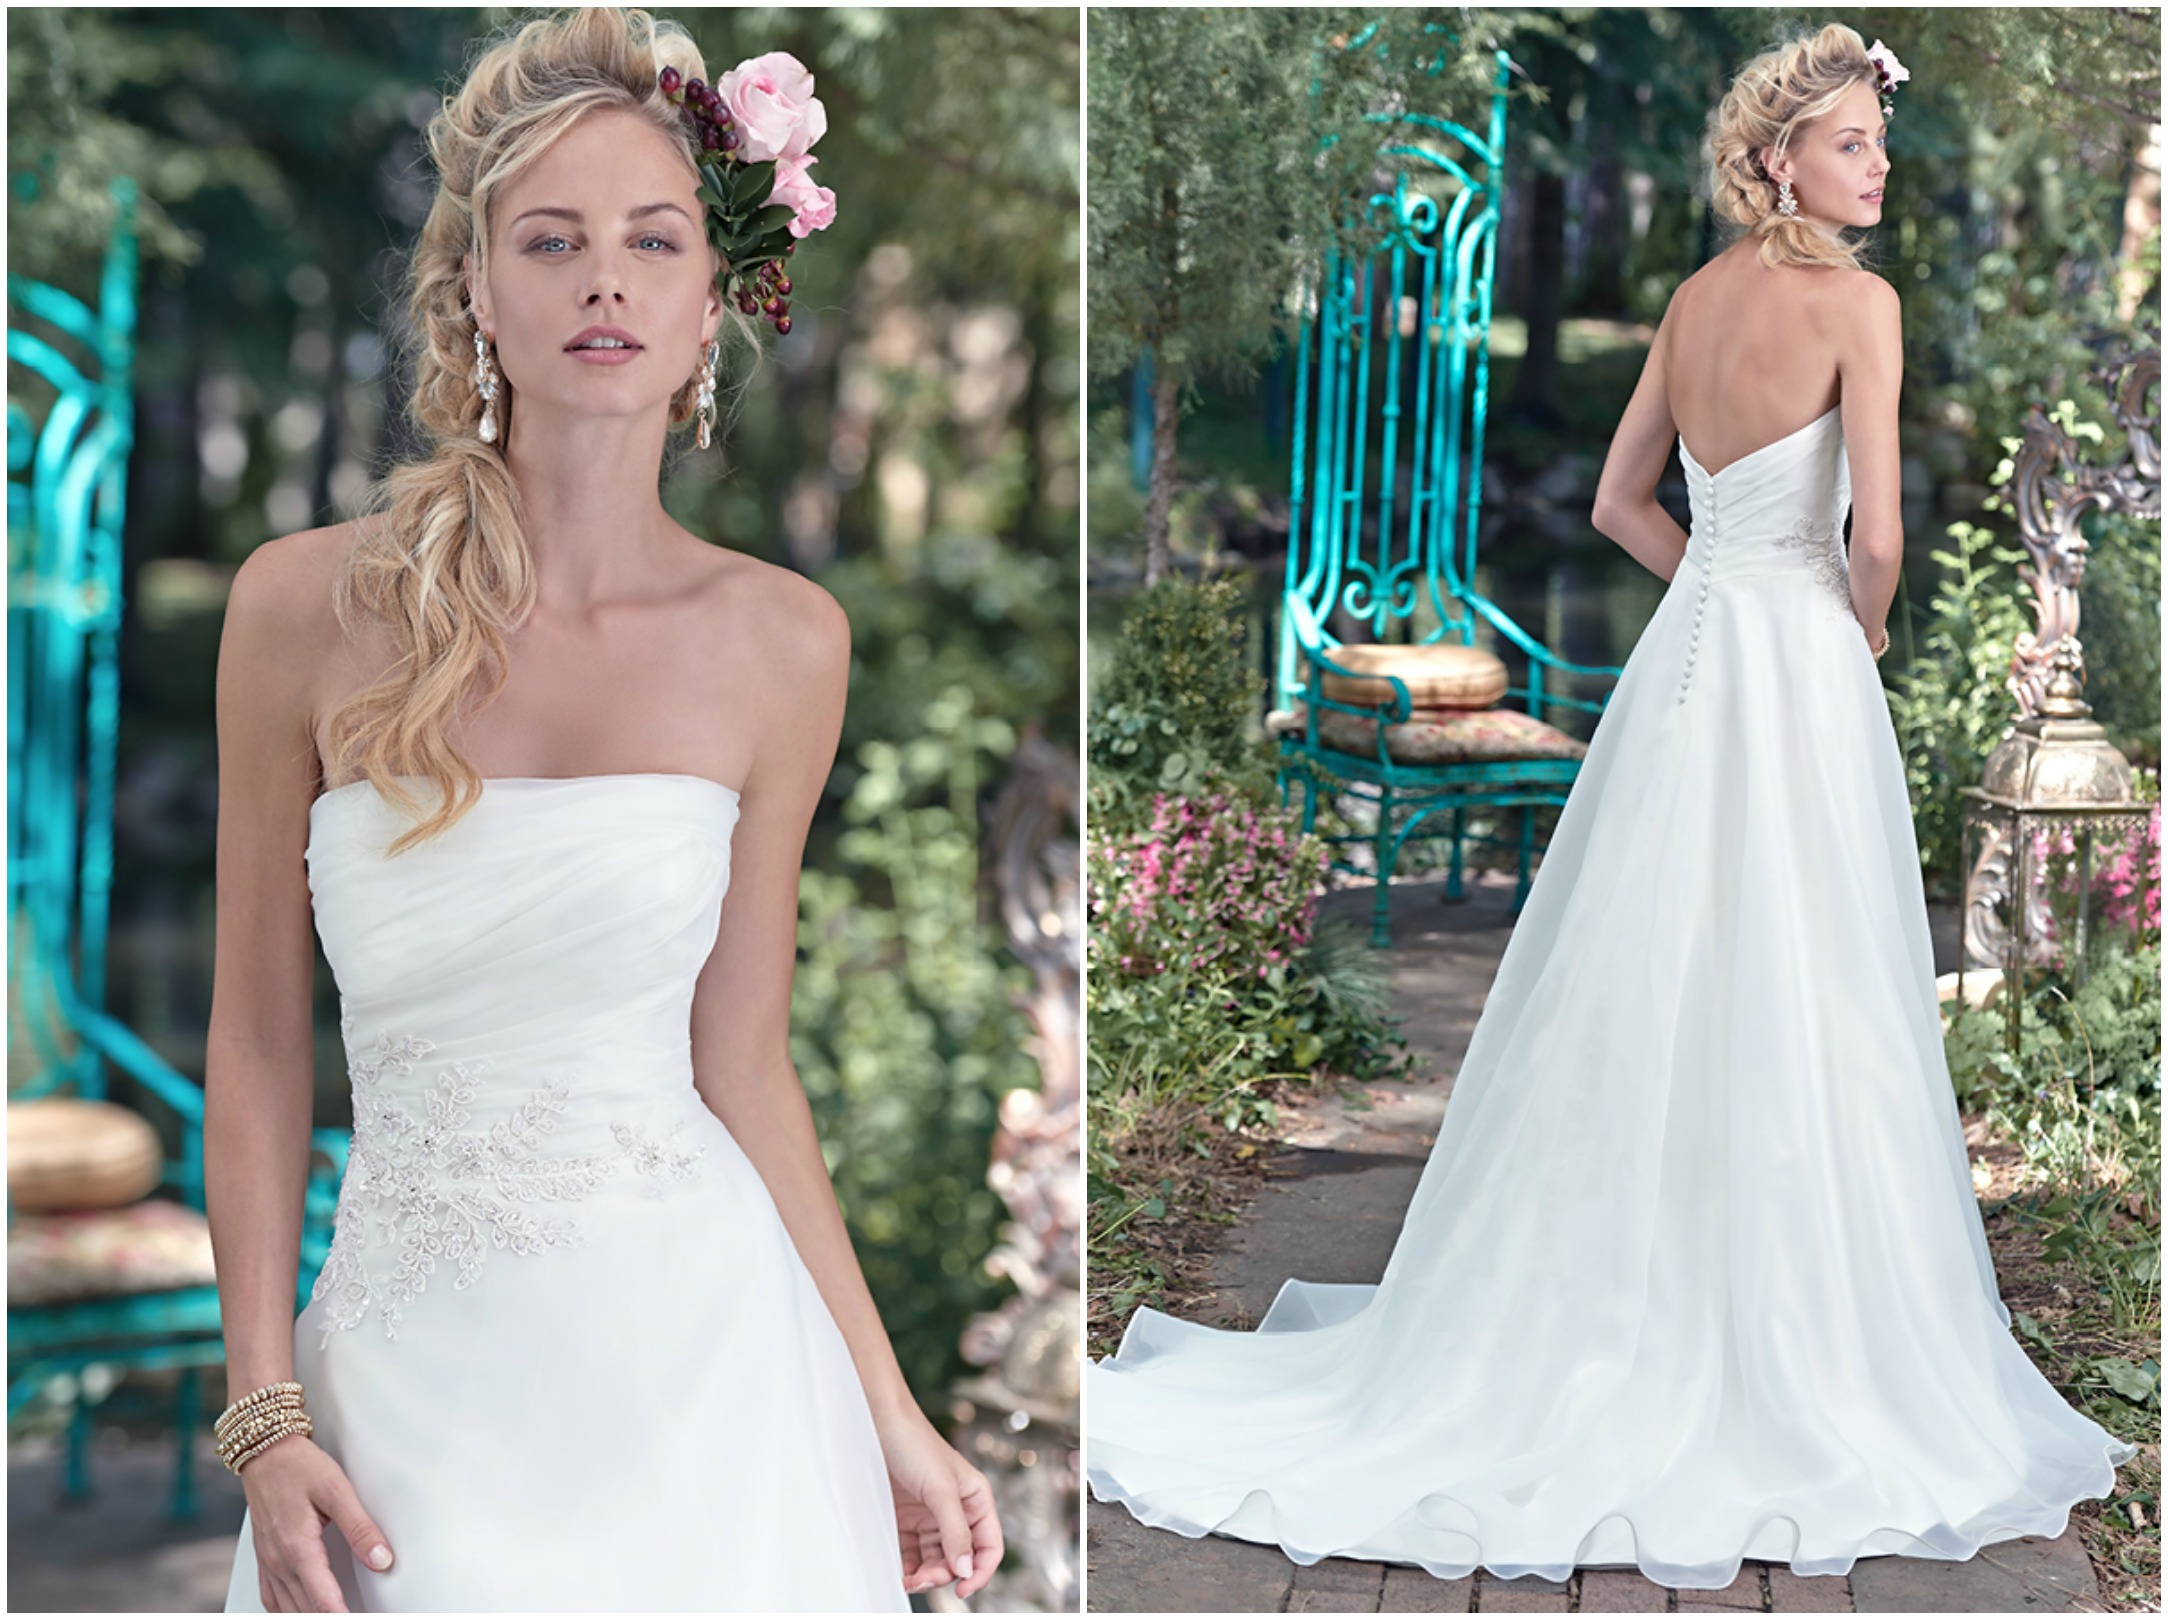 <a href="http://www.maggiesottero.com/maggie-sottero/madge/9526" target="_blank">Maggie Sottero Spring 2016</a>